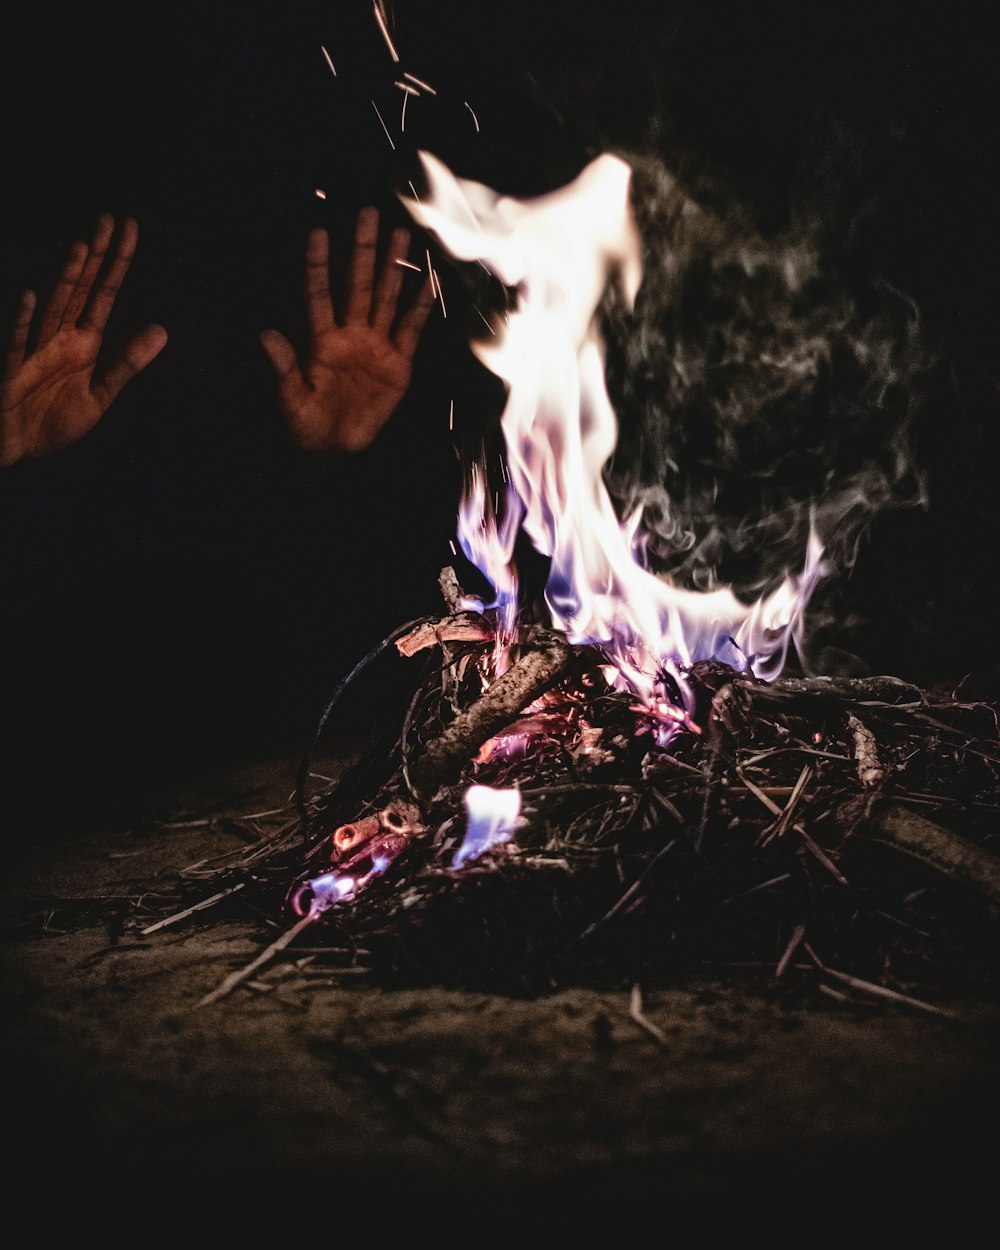 person heating both hands on bornfire